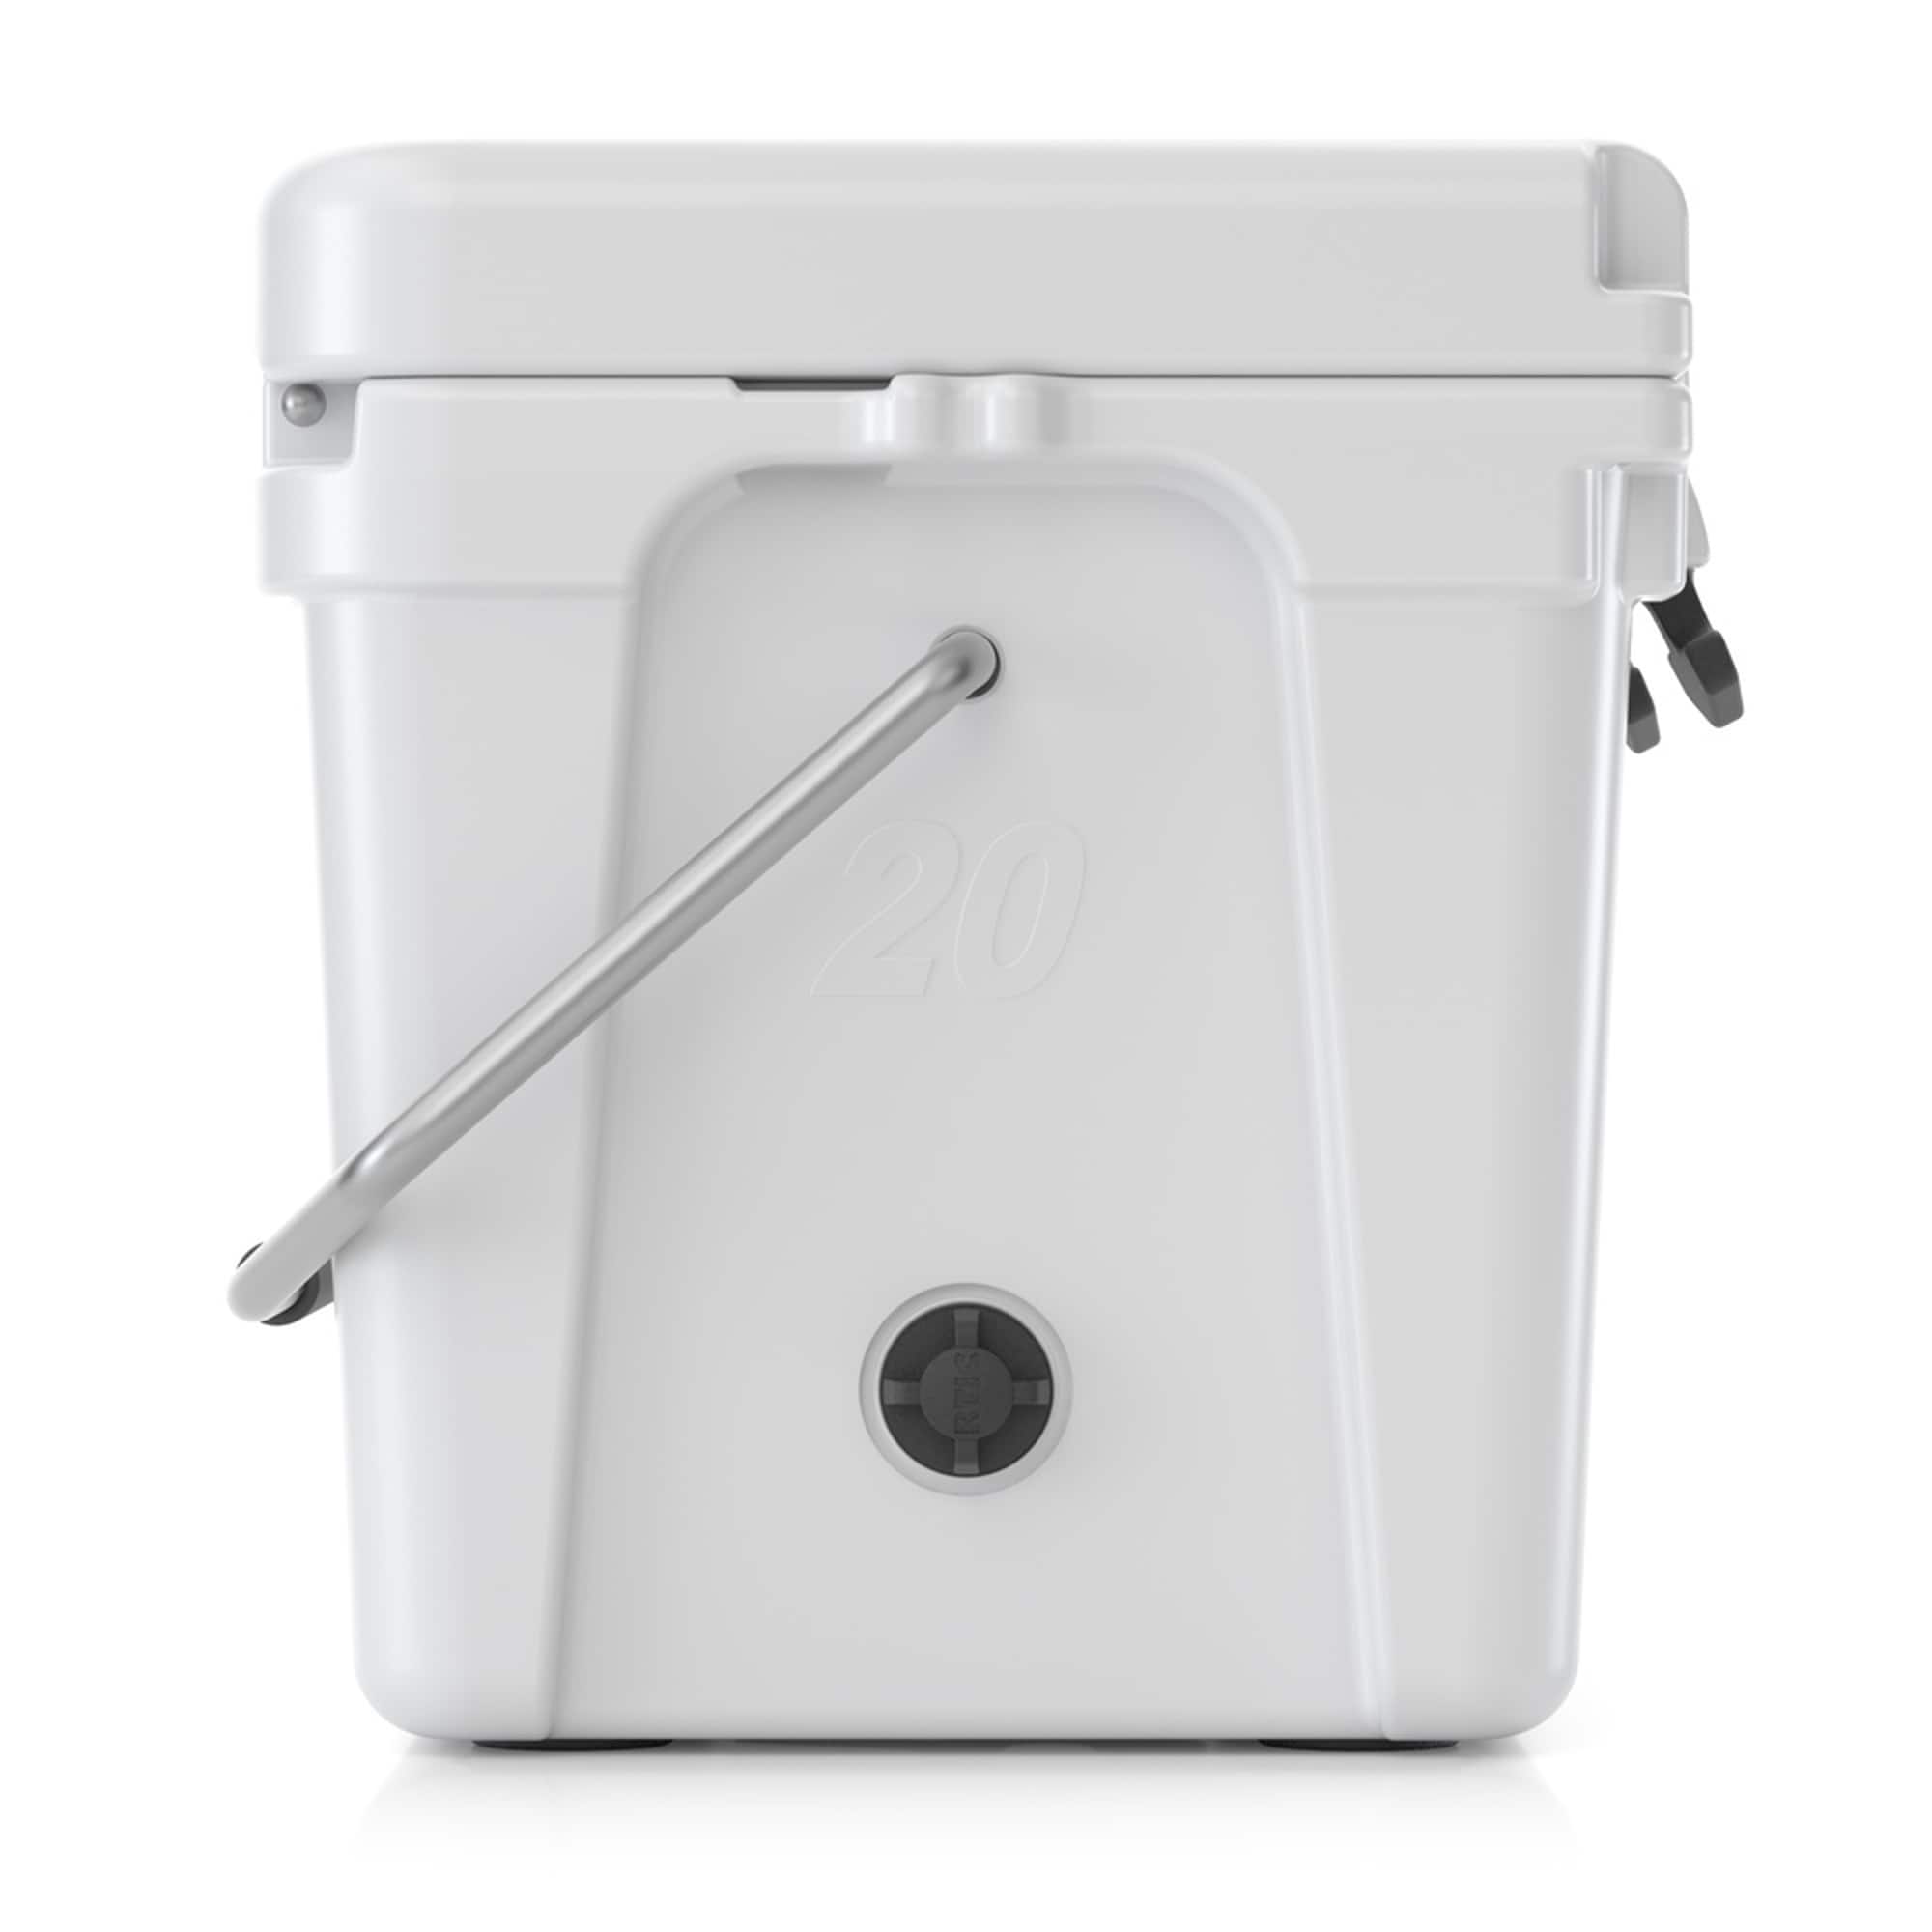 RTIC Outdoors Hard Cooler White 65-Quart Insulated Personal Cooler